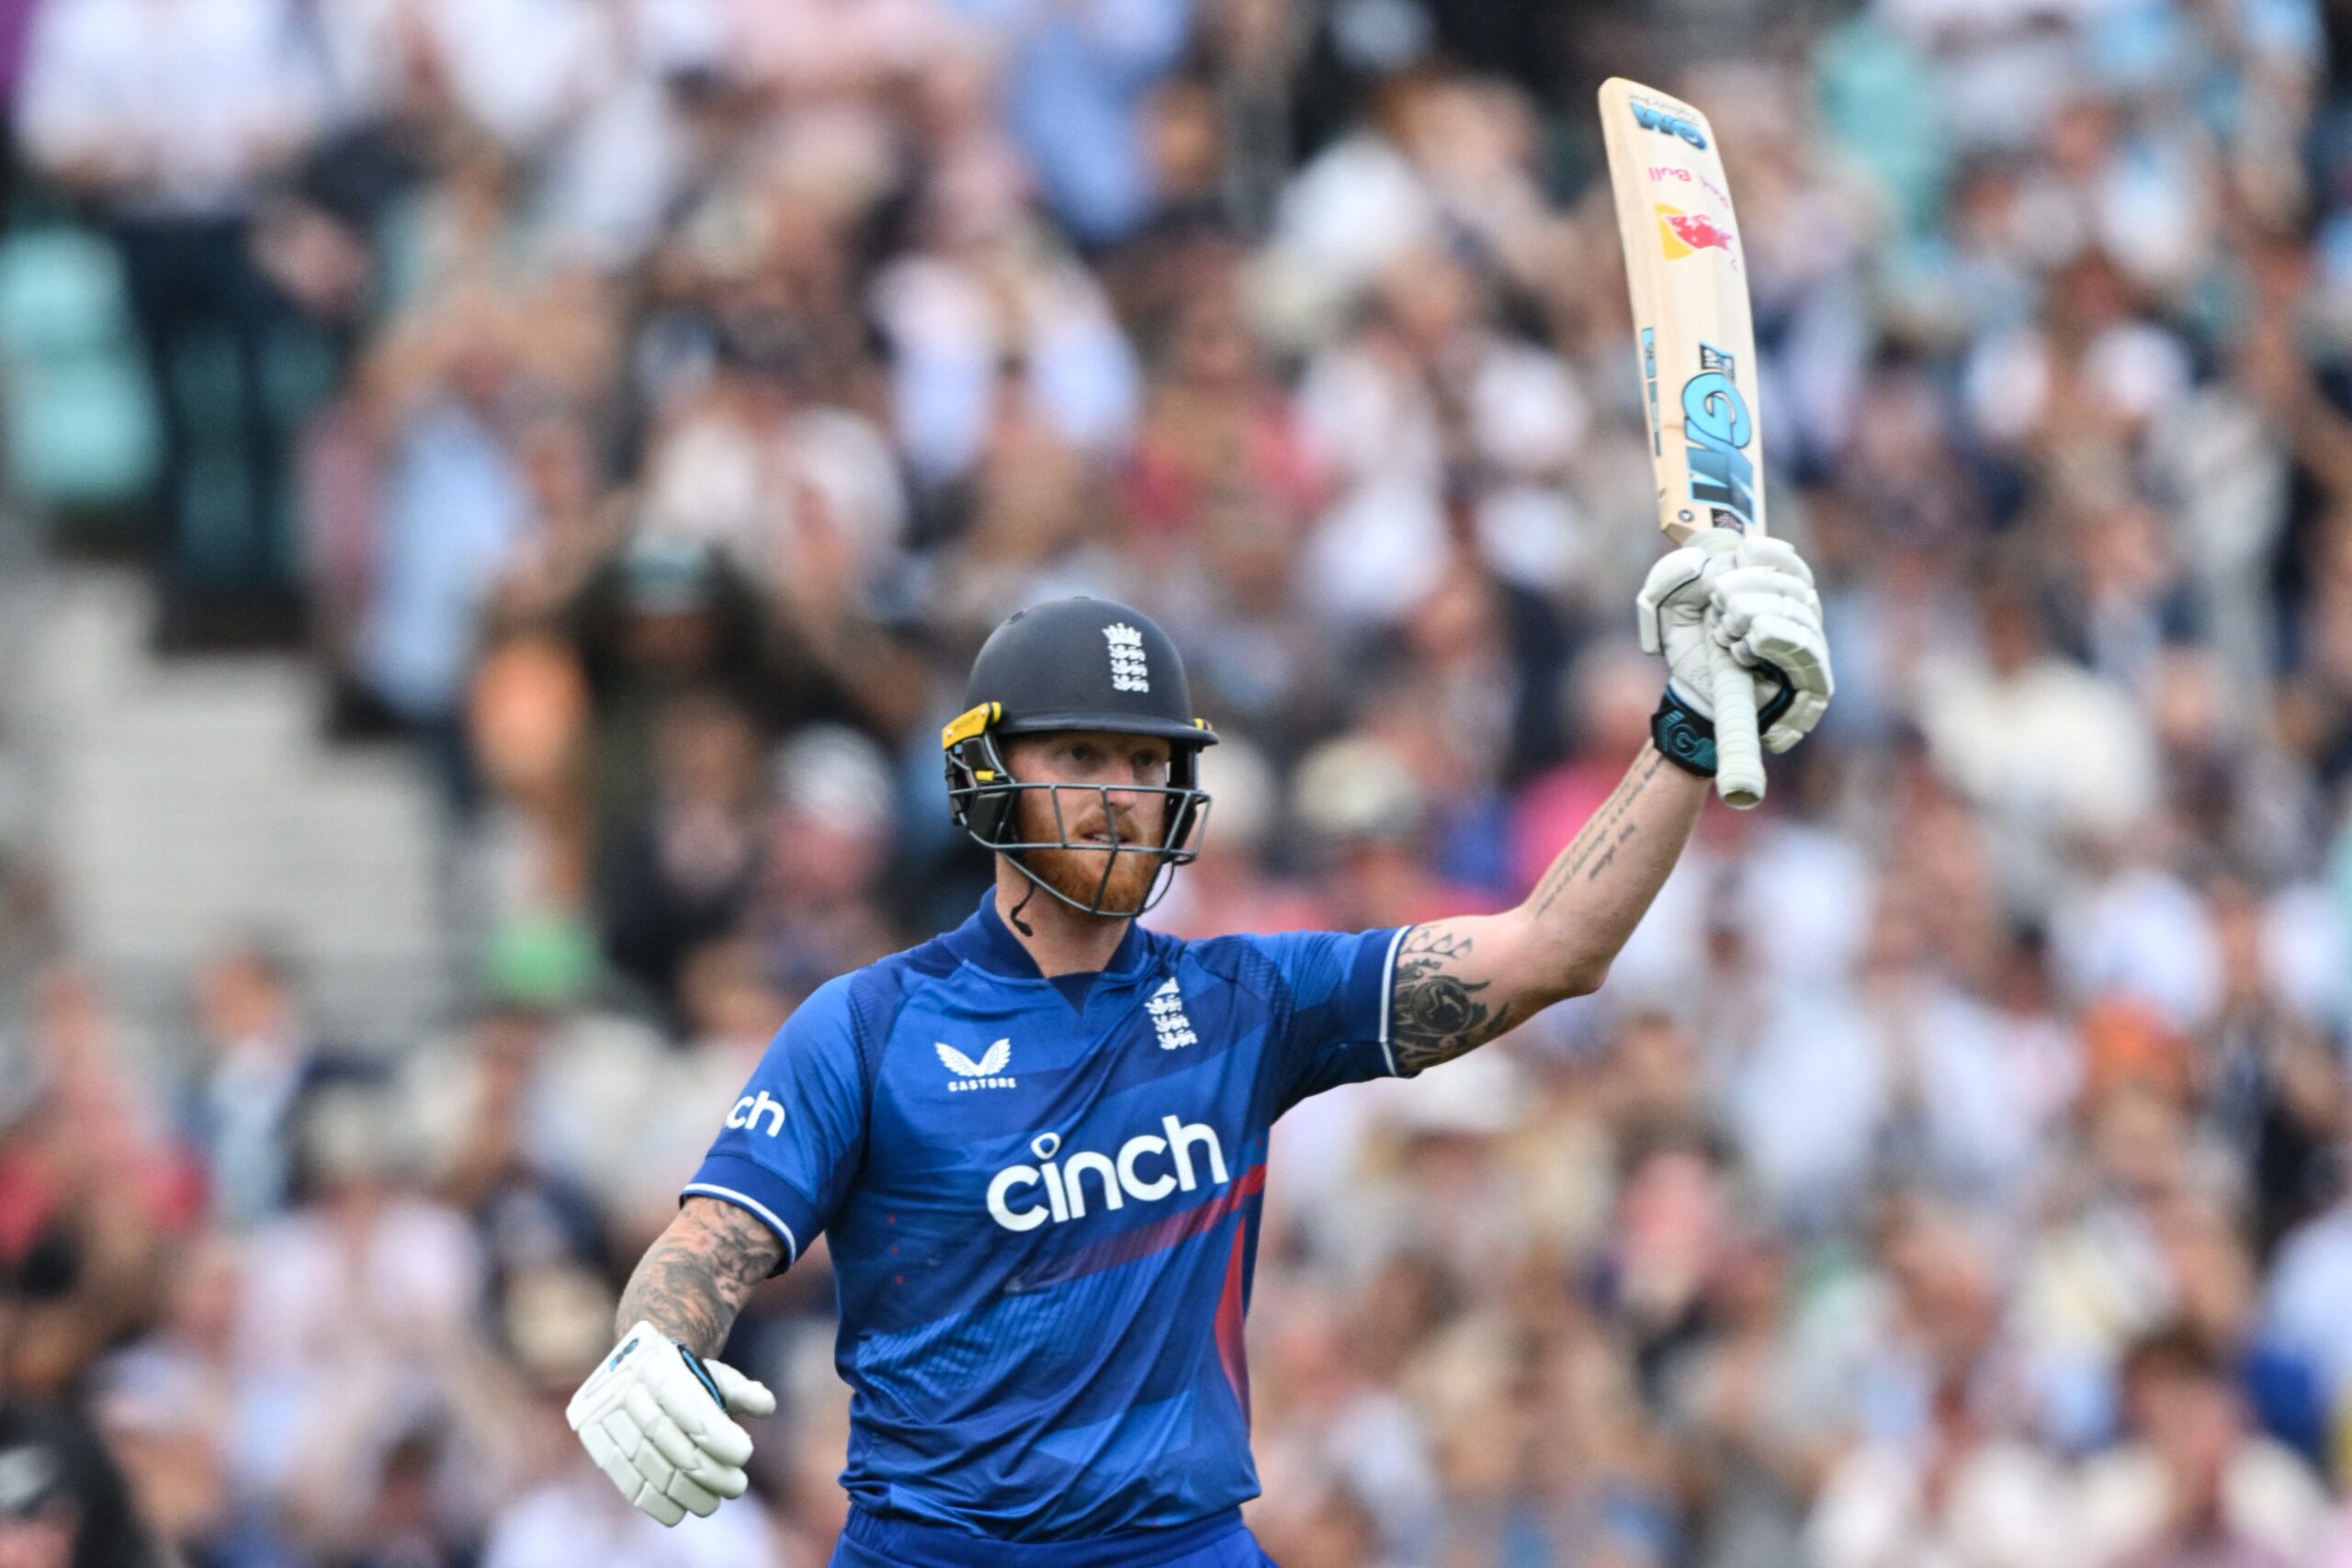 Ben Stokes Shatters Records With Explosive 182-Run Knock For England